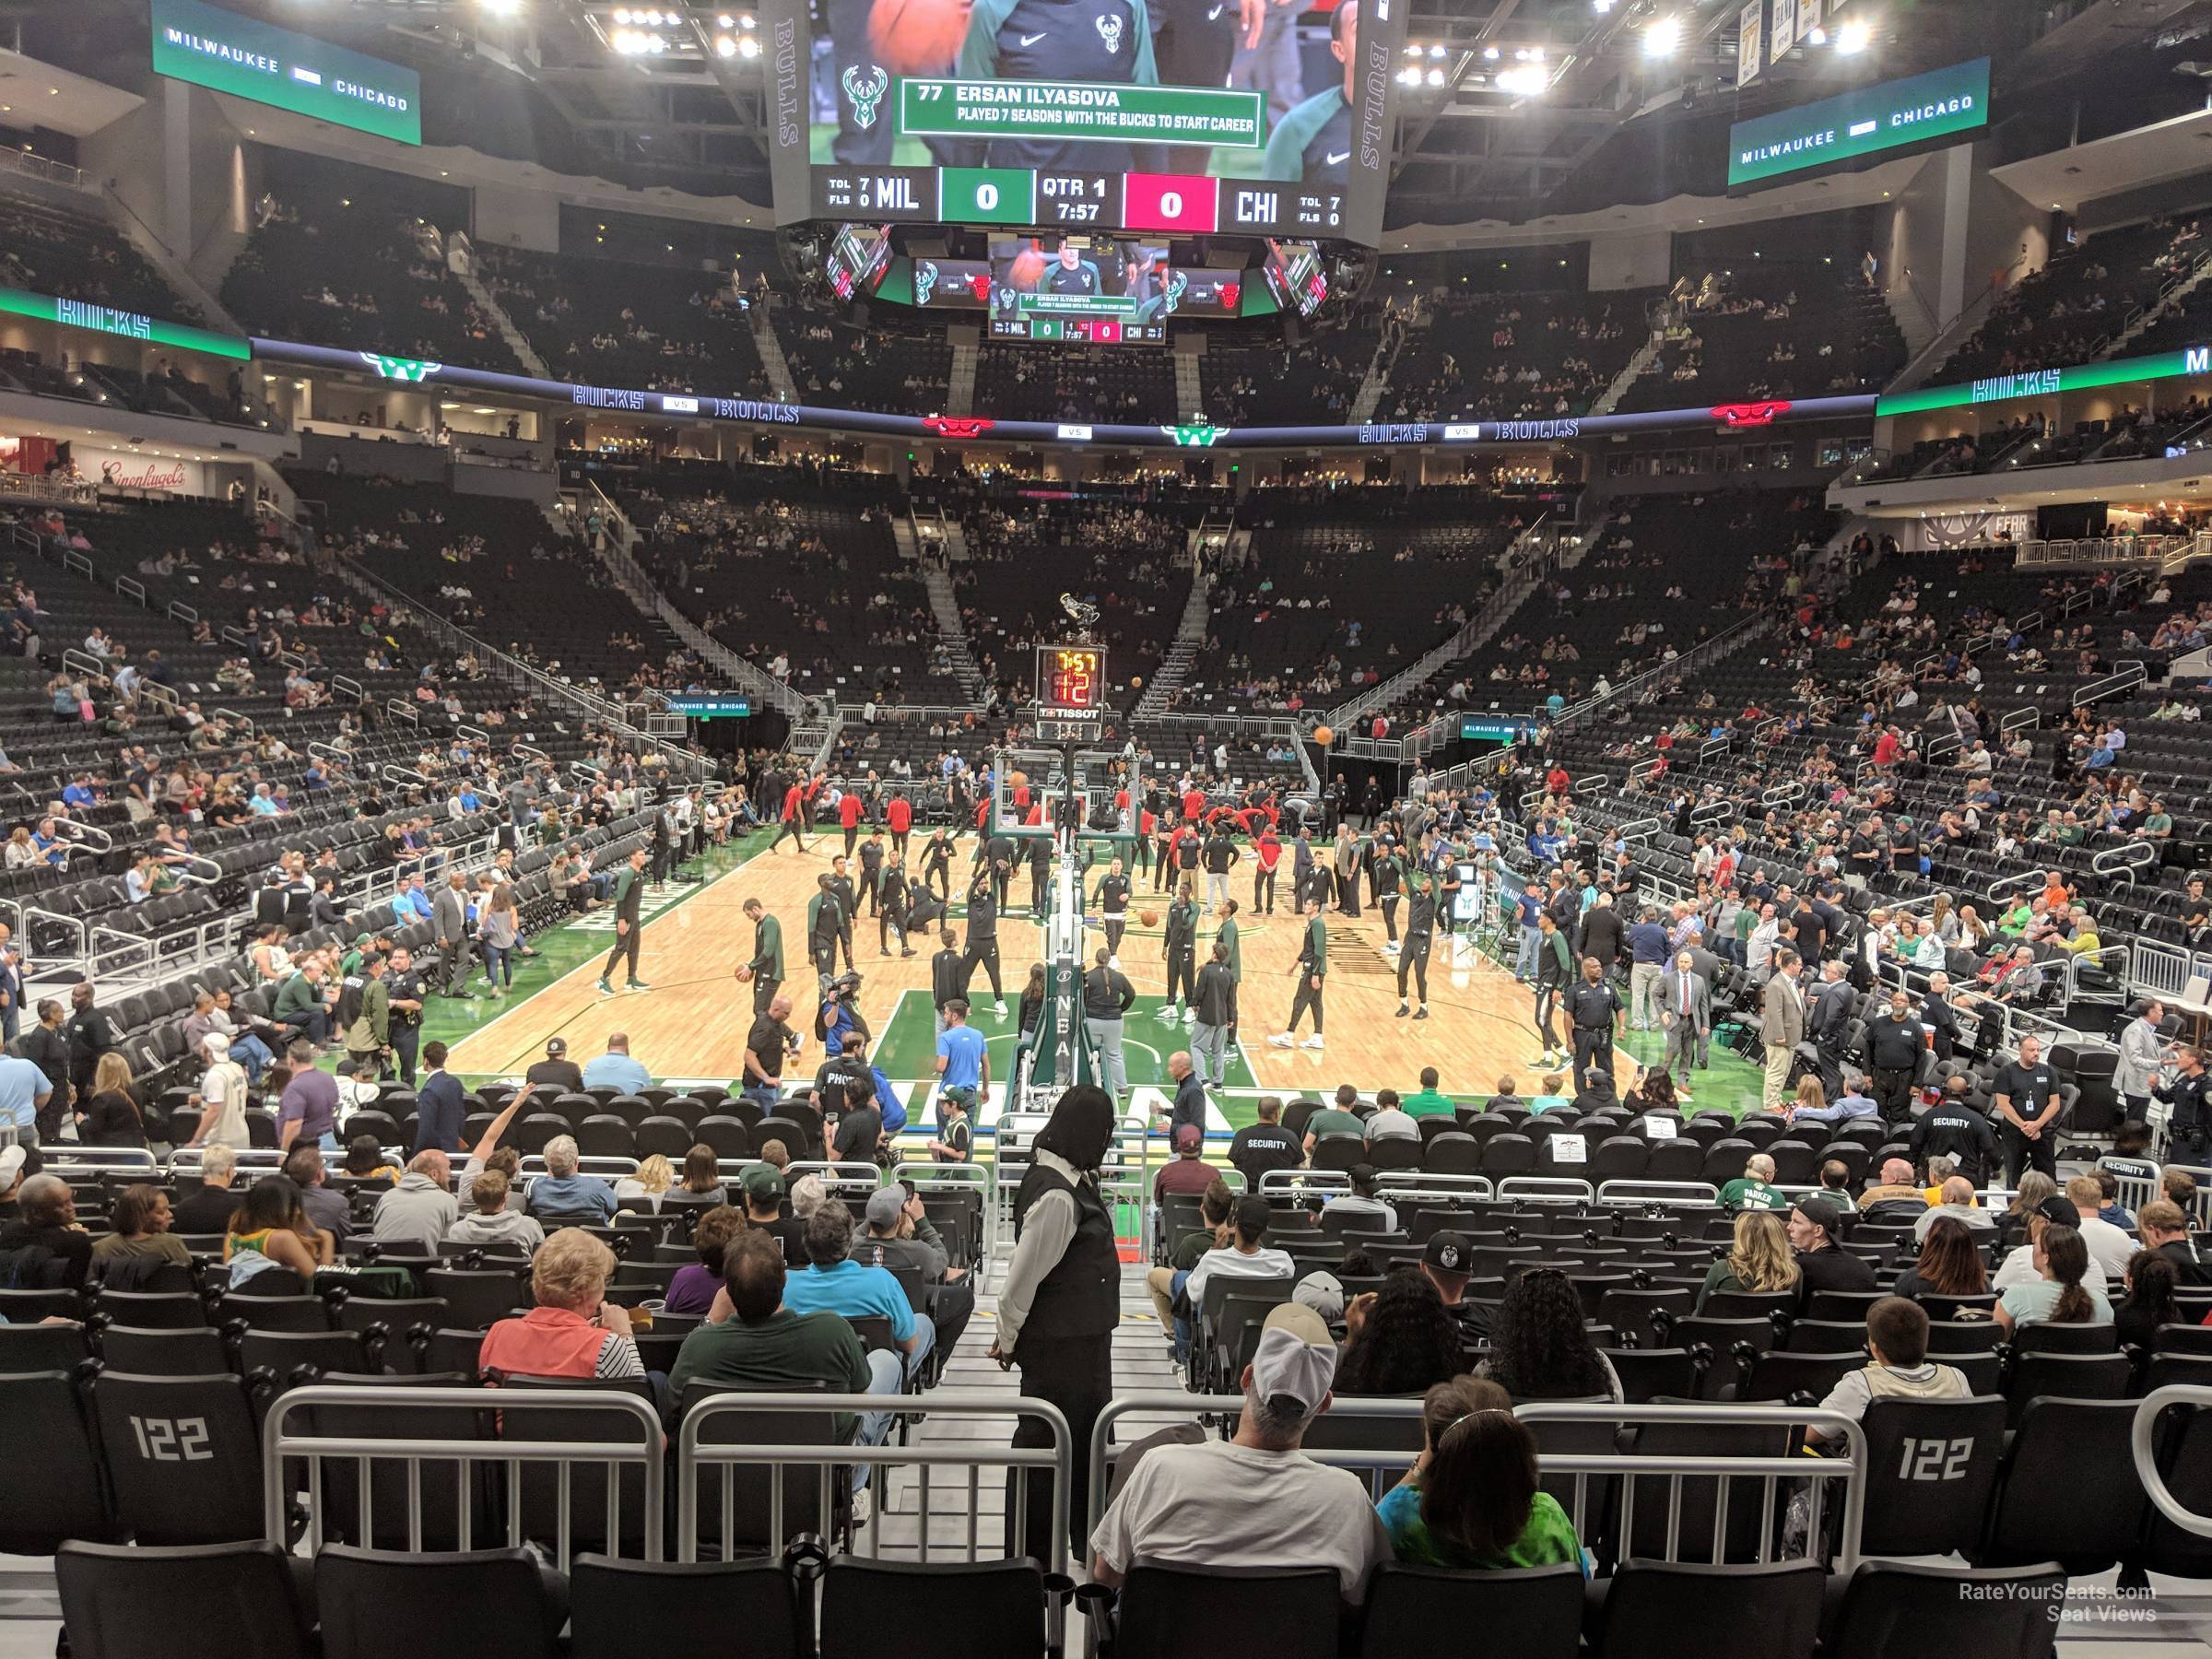 section 101, row 10 seat view  for basketball - fiserv forum